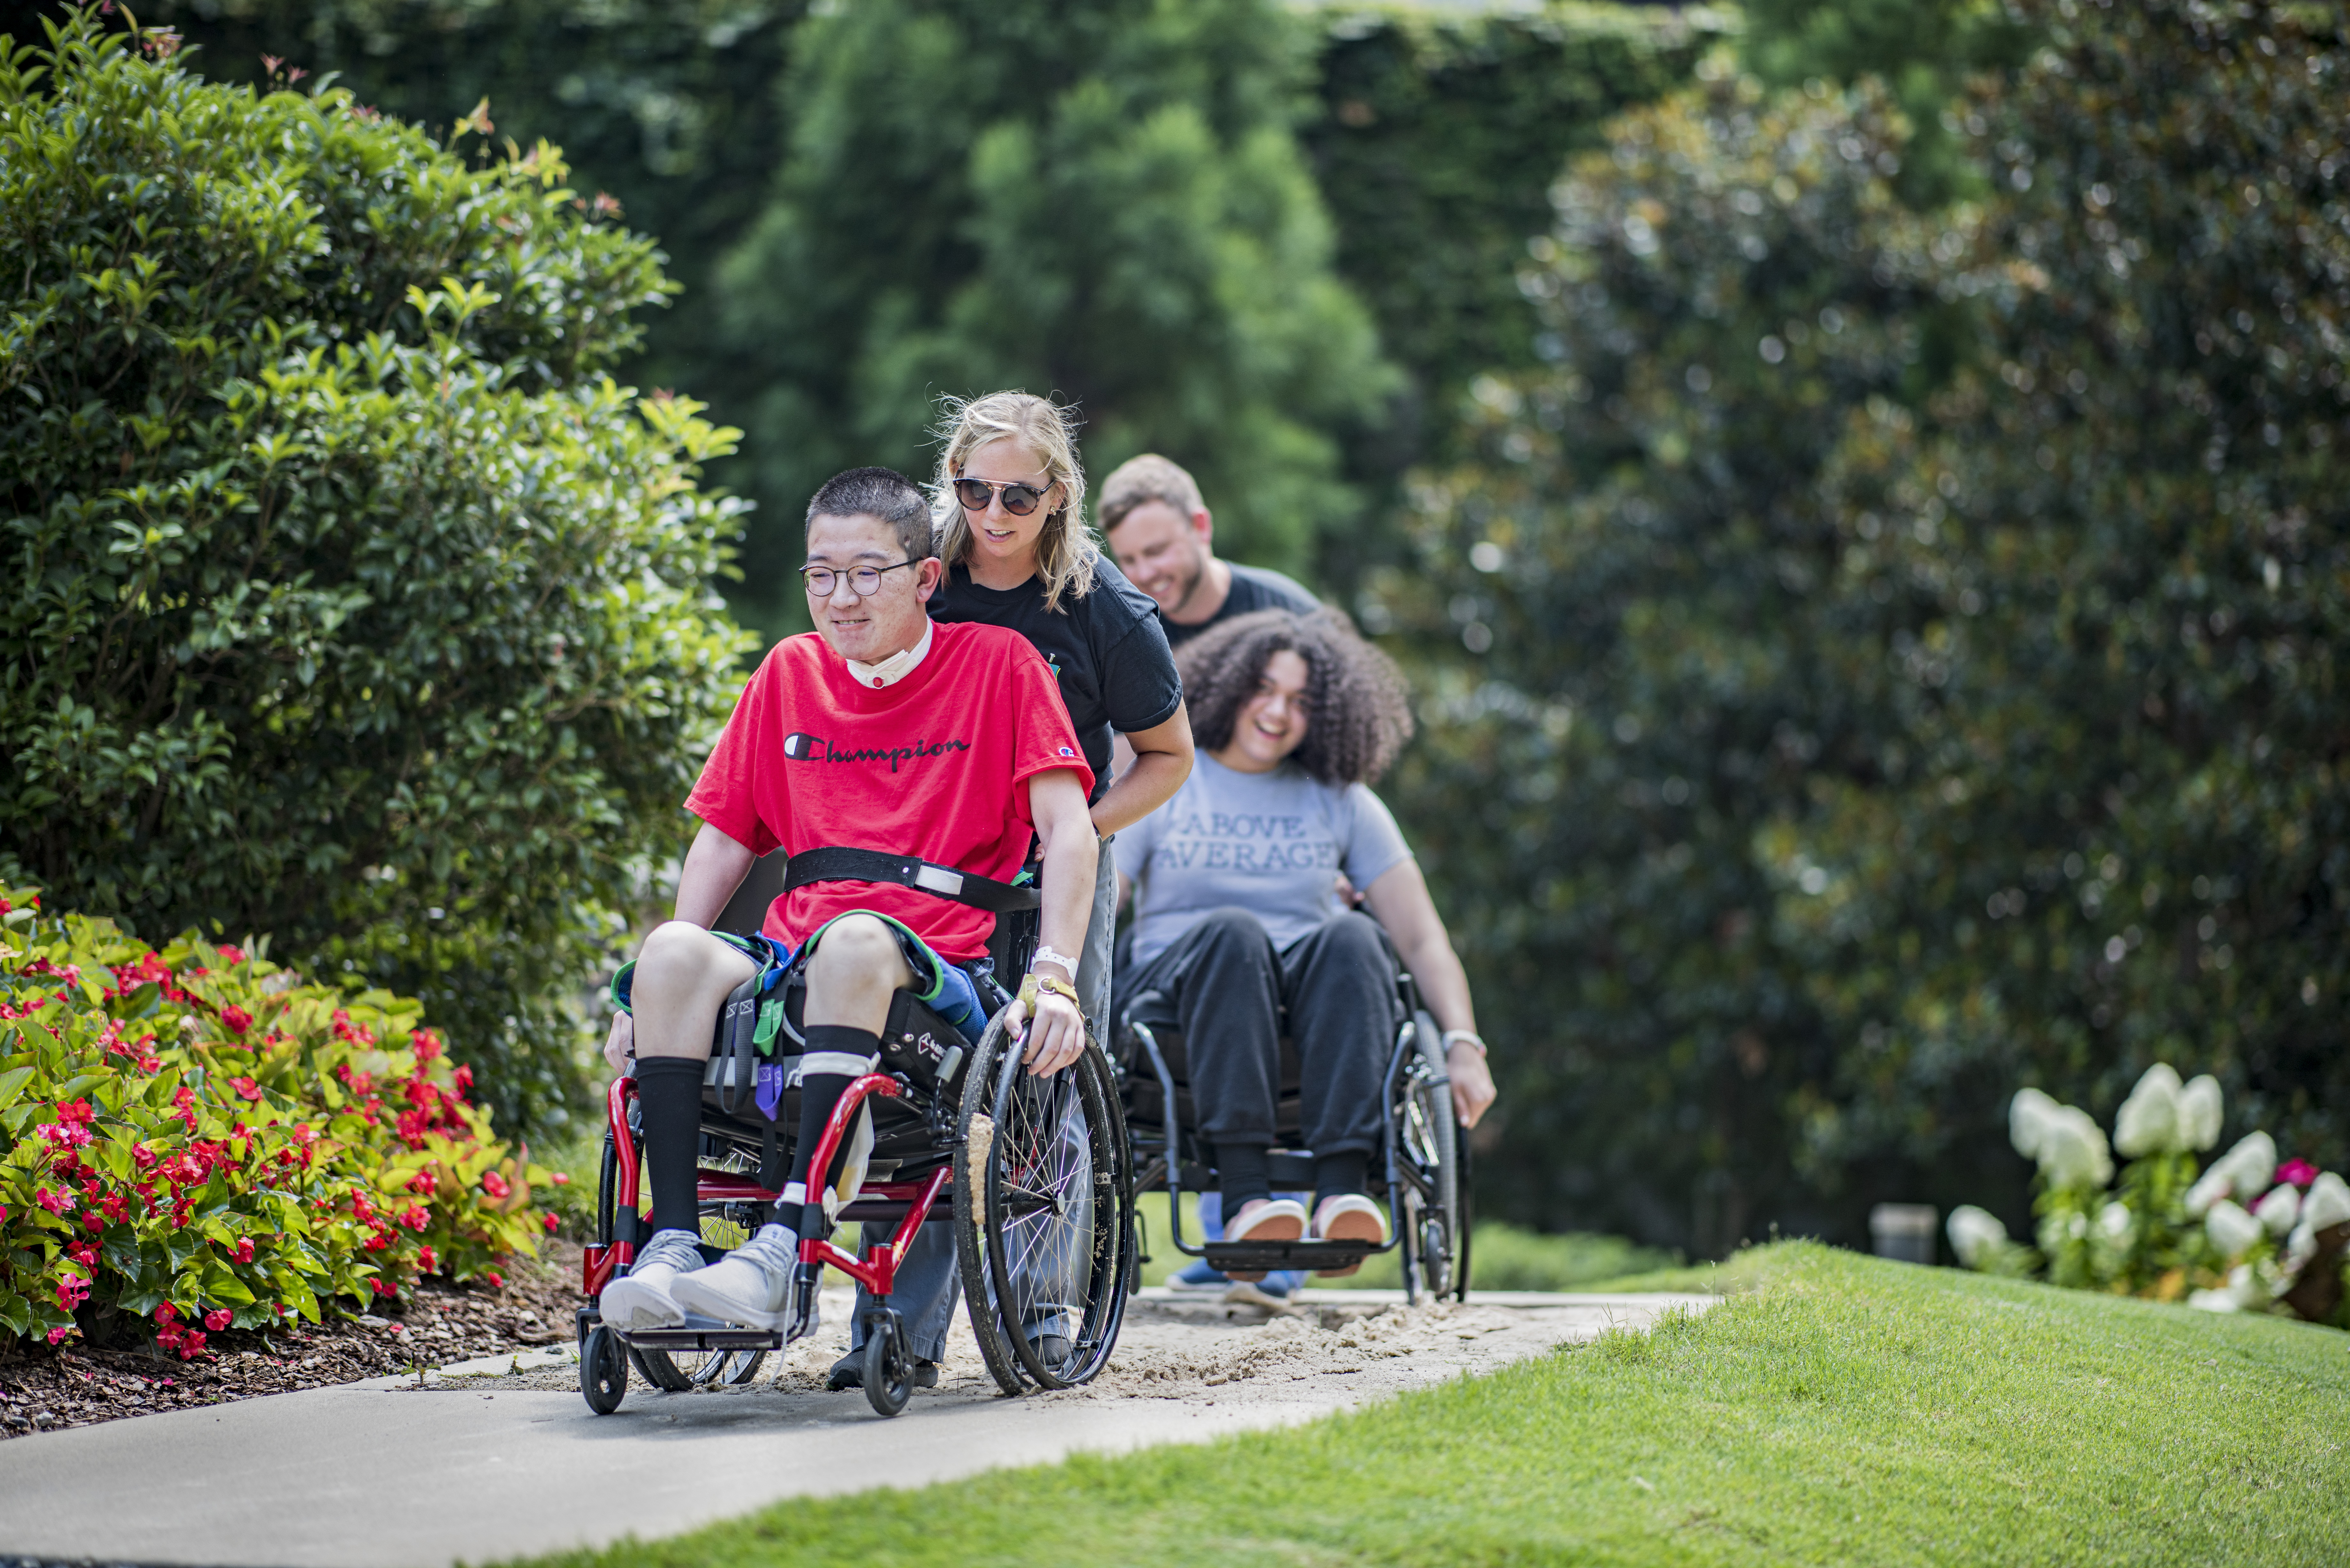 Patients work on wheelchair skills outside